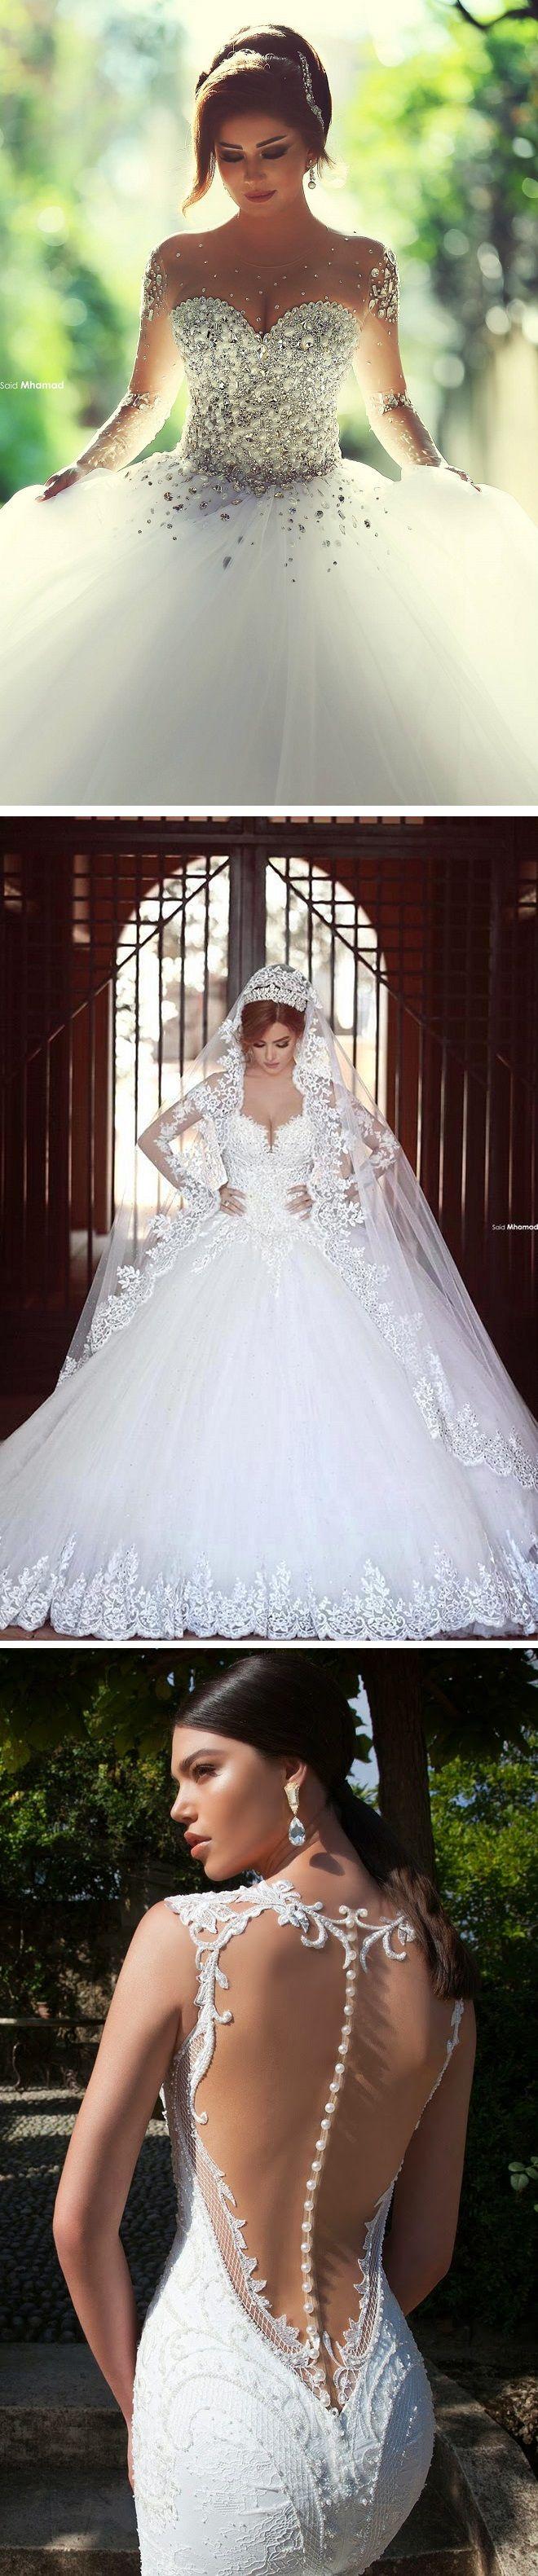 Mariage - 10 Jaw-Droppingly Beautiful Wedding Dresses To Obsess Over!